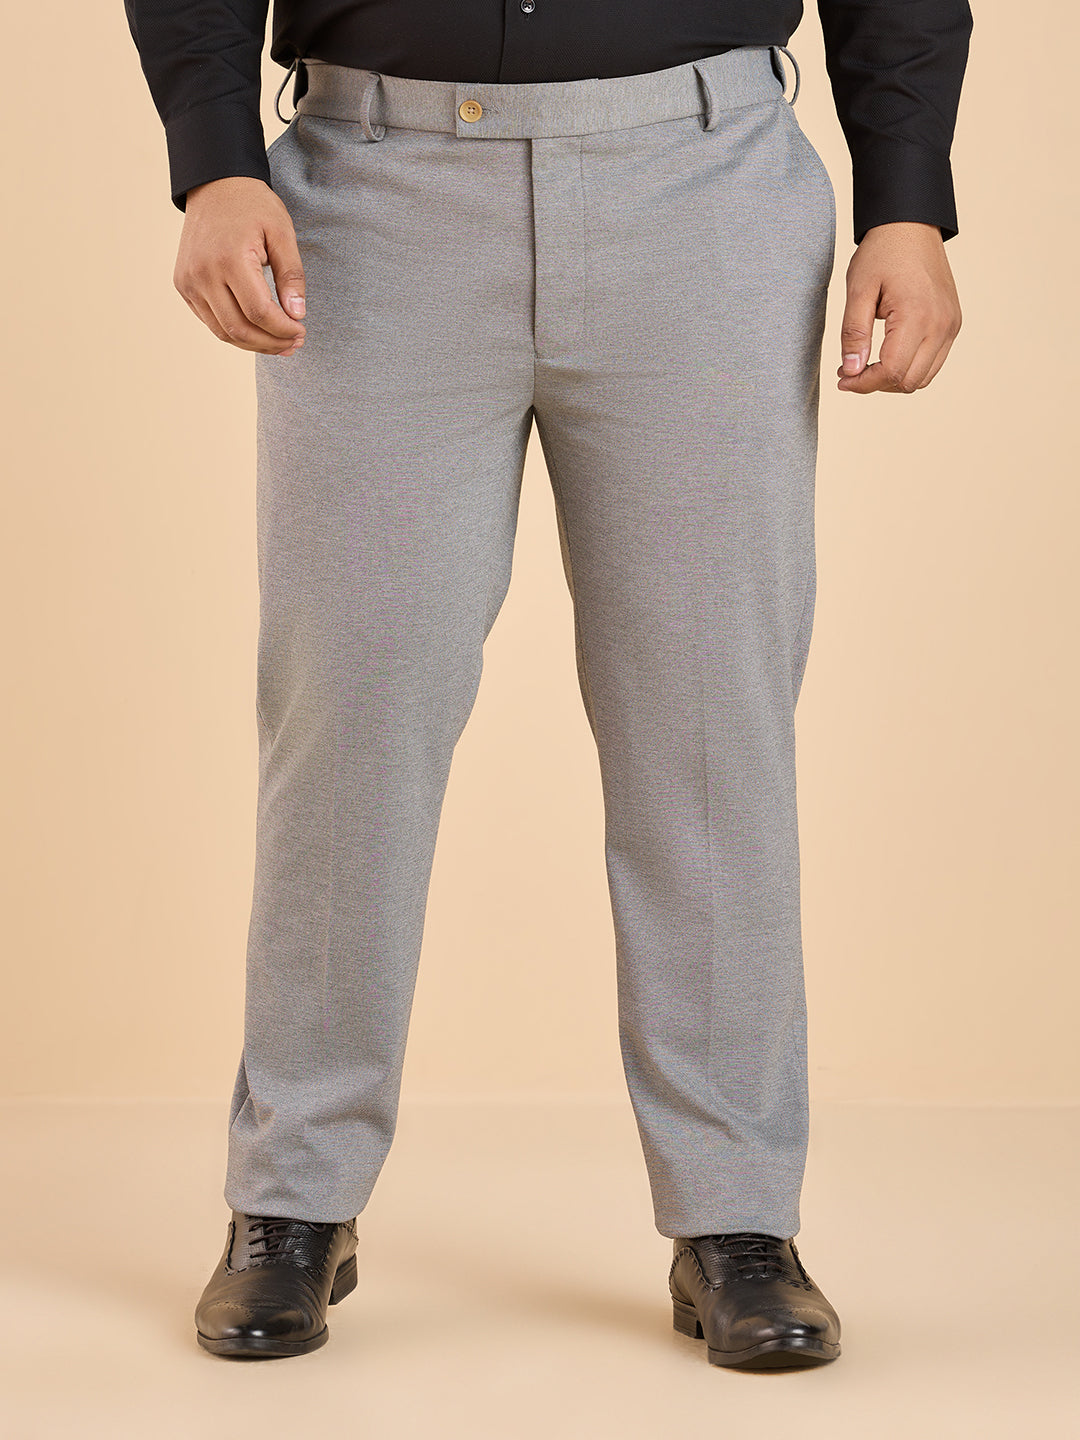 Luxe Knit Elegance Structure Trouser